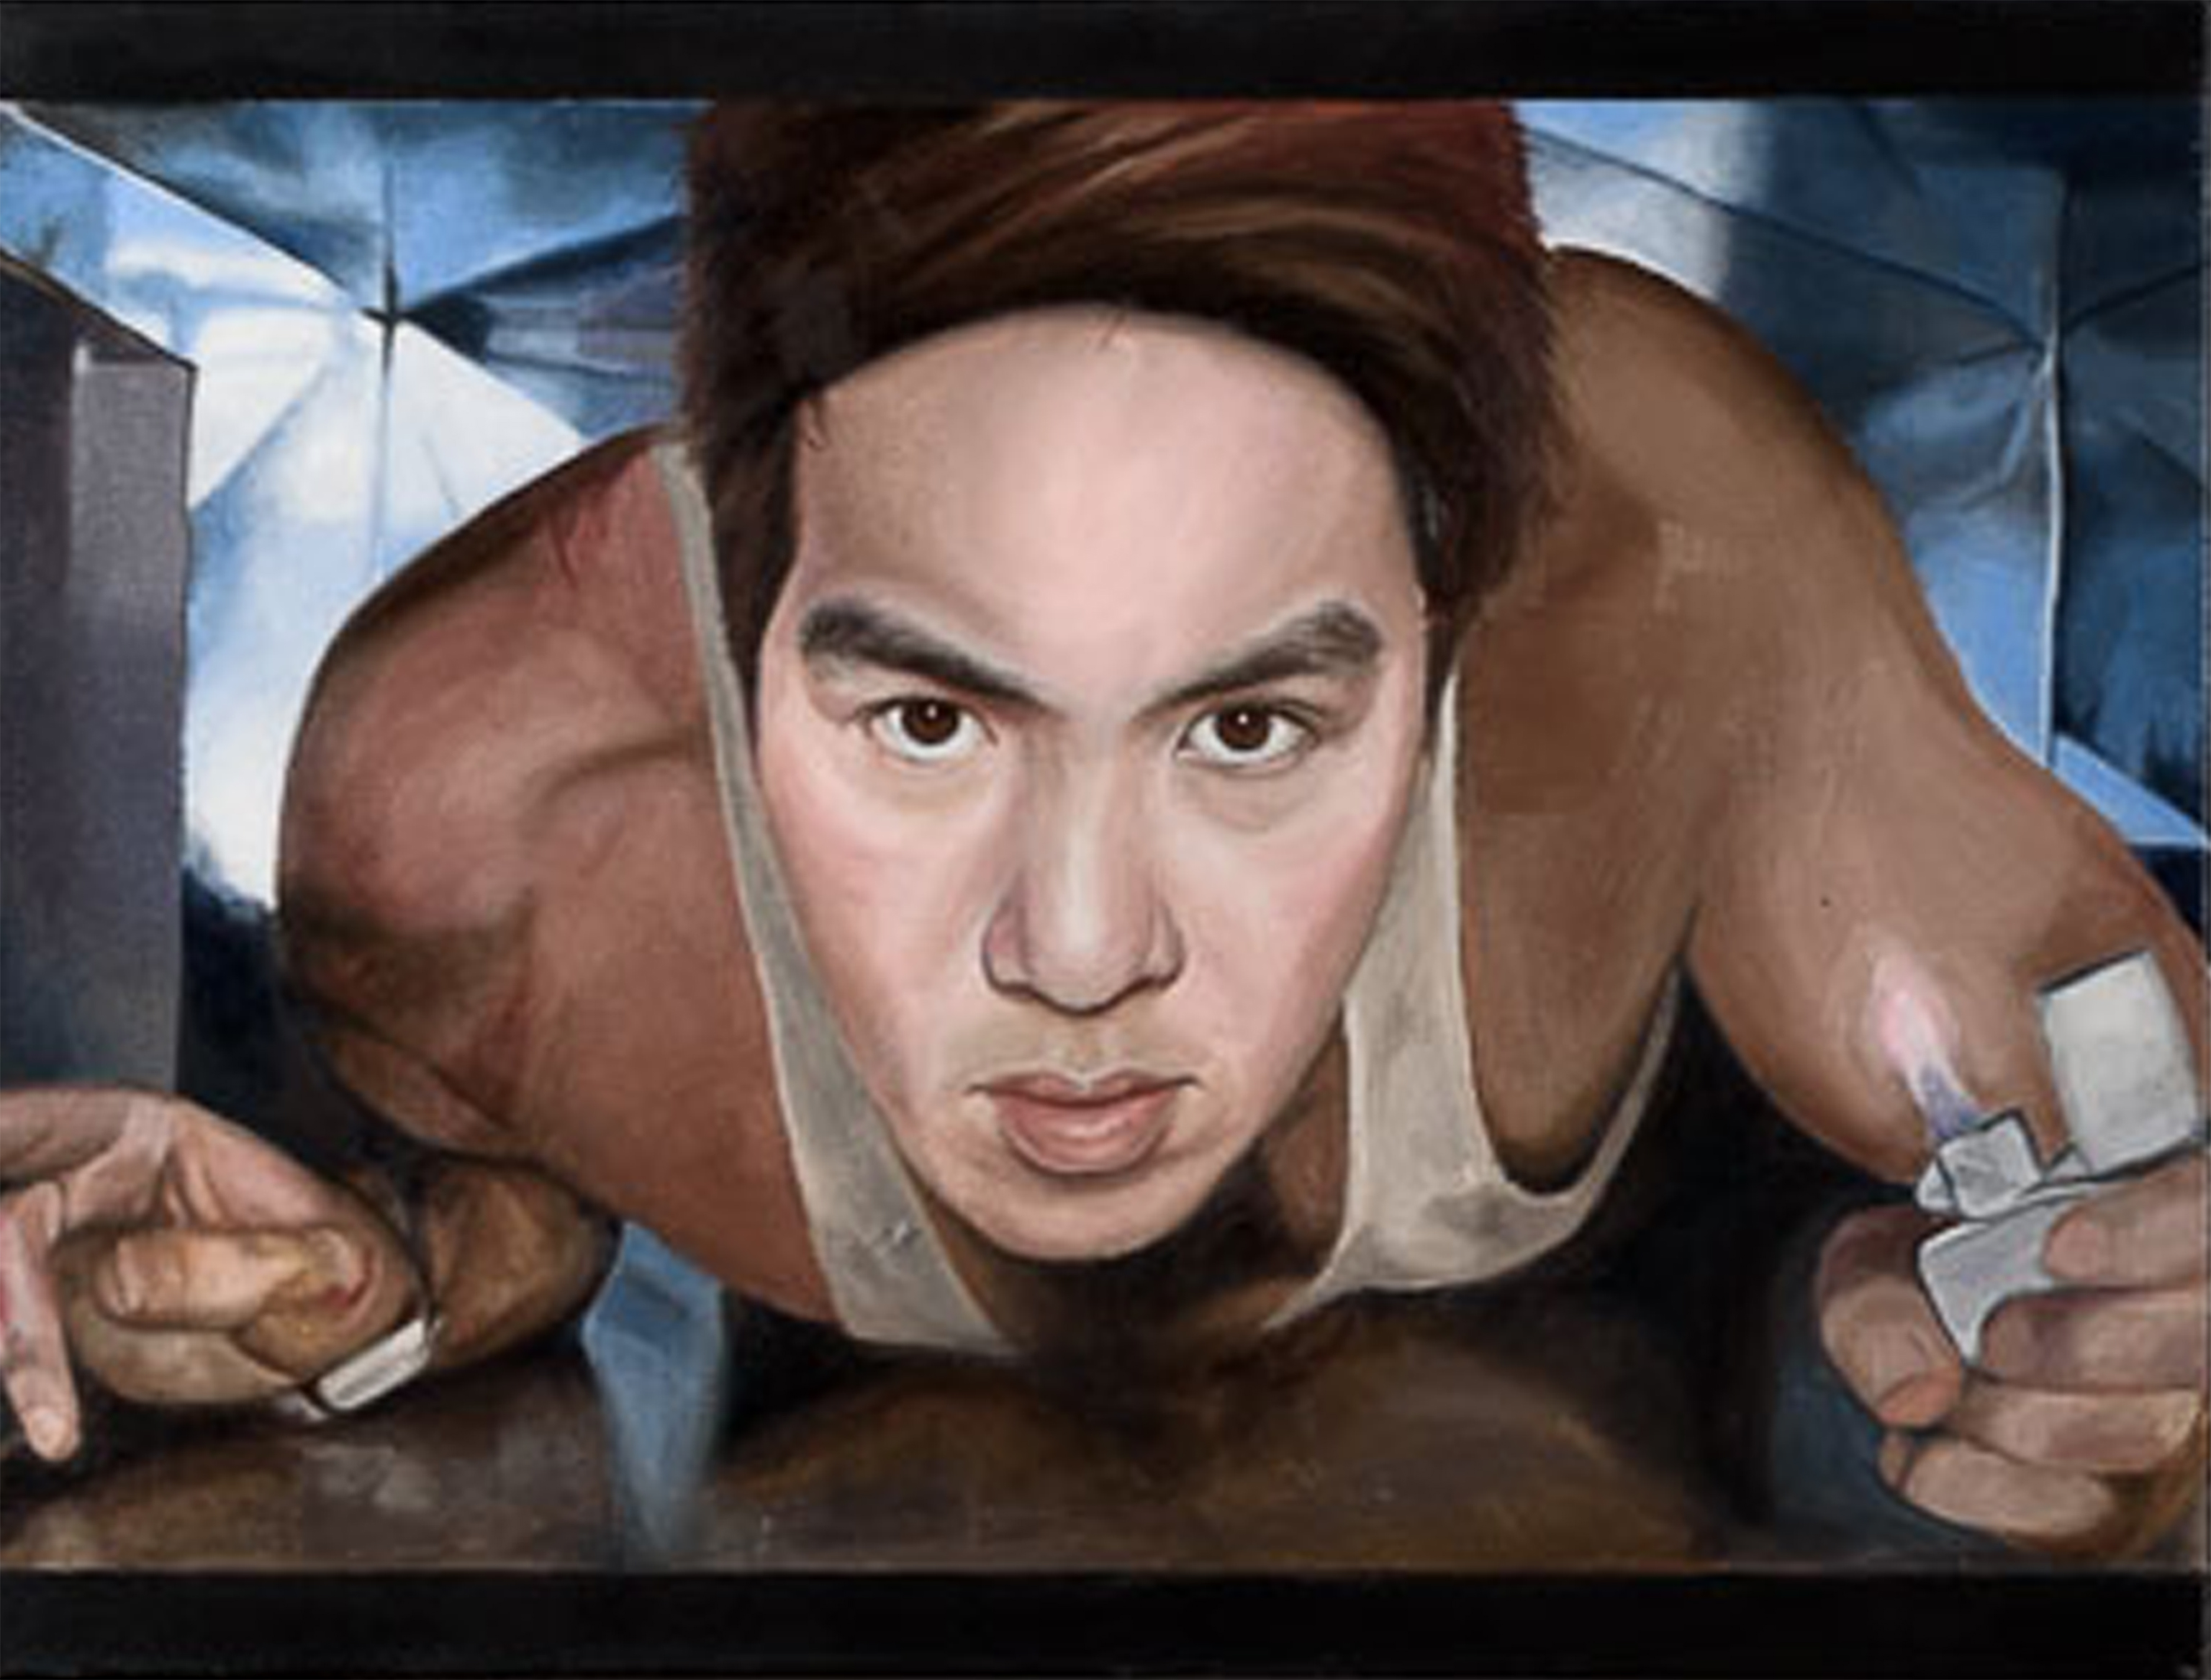 A painting of a person in the style of a character from the film Die Hard.